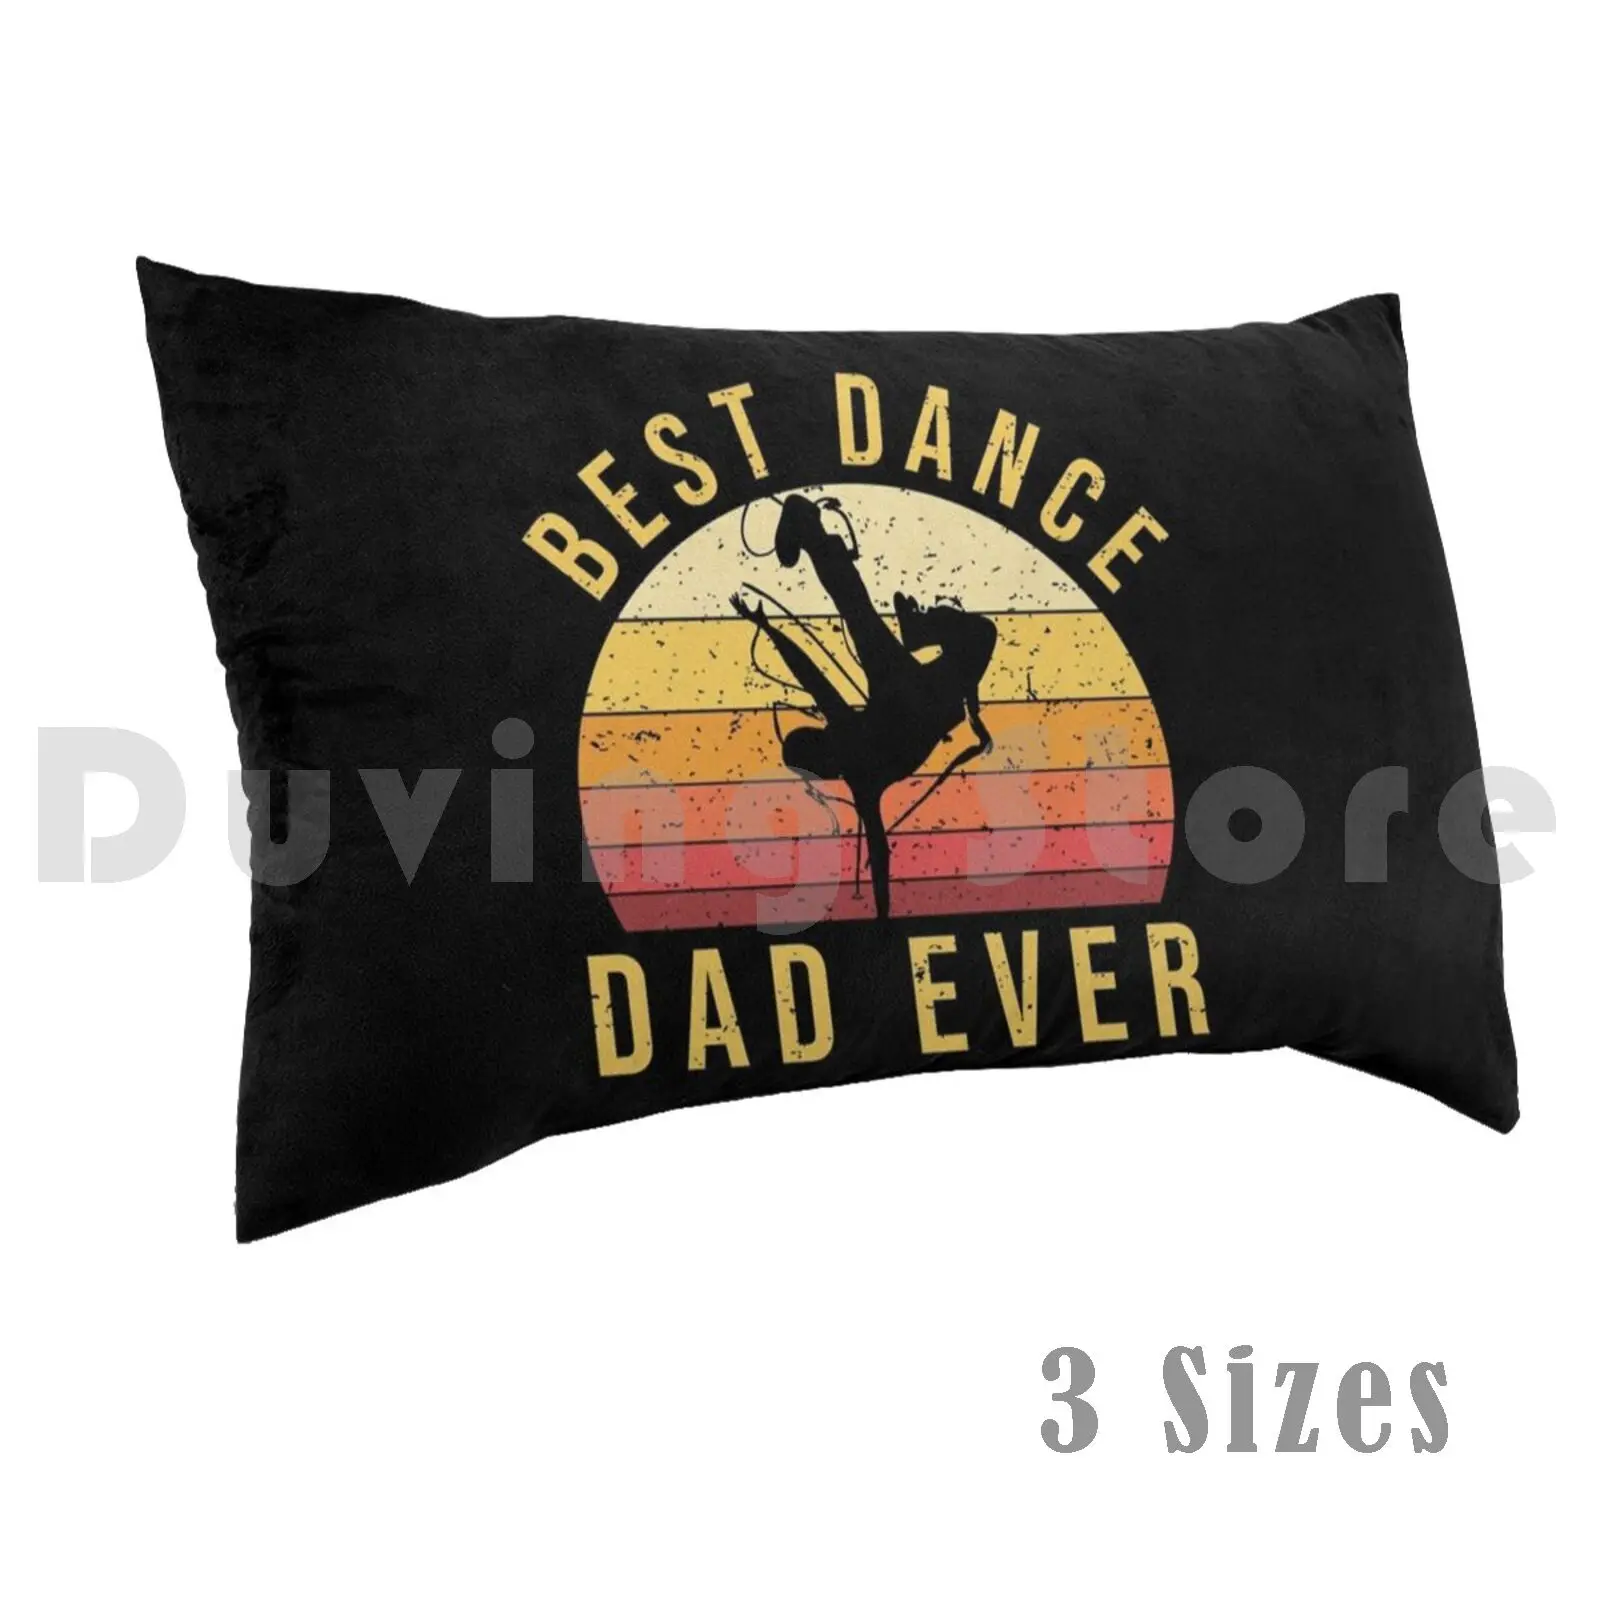 

Best Dance Dad Ever Fathers Day Gift Pillow Case Printed 35x50 Dad Mom Family Gift Idea Fathers Day Daddy